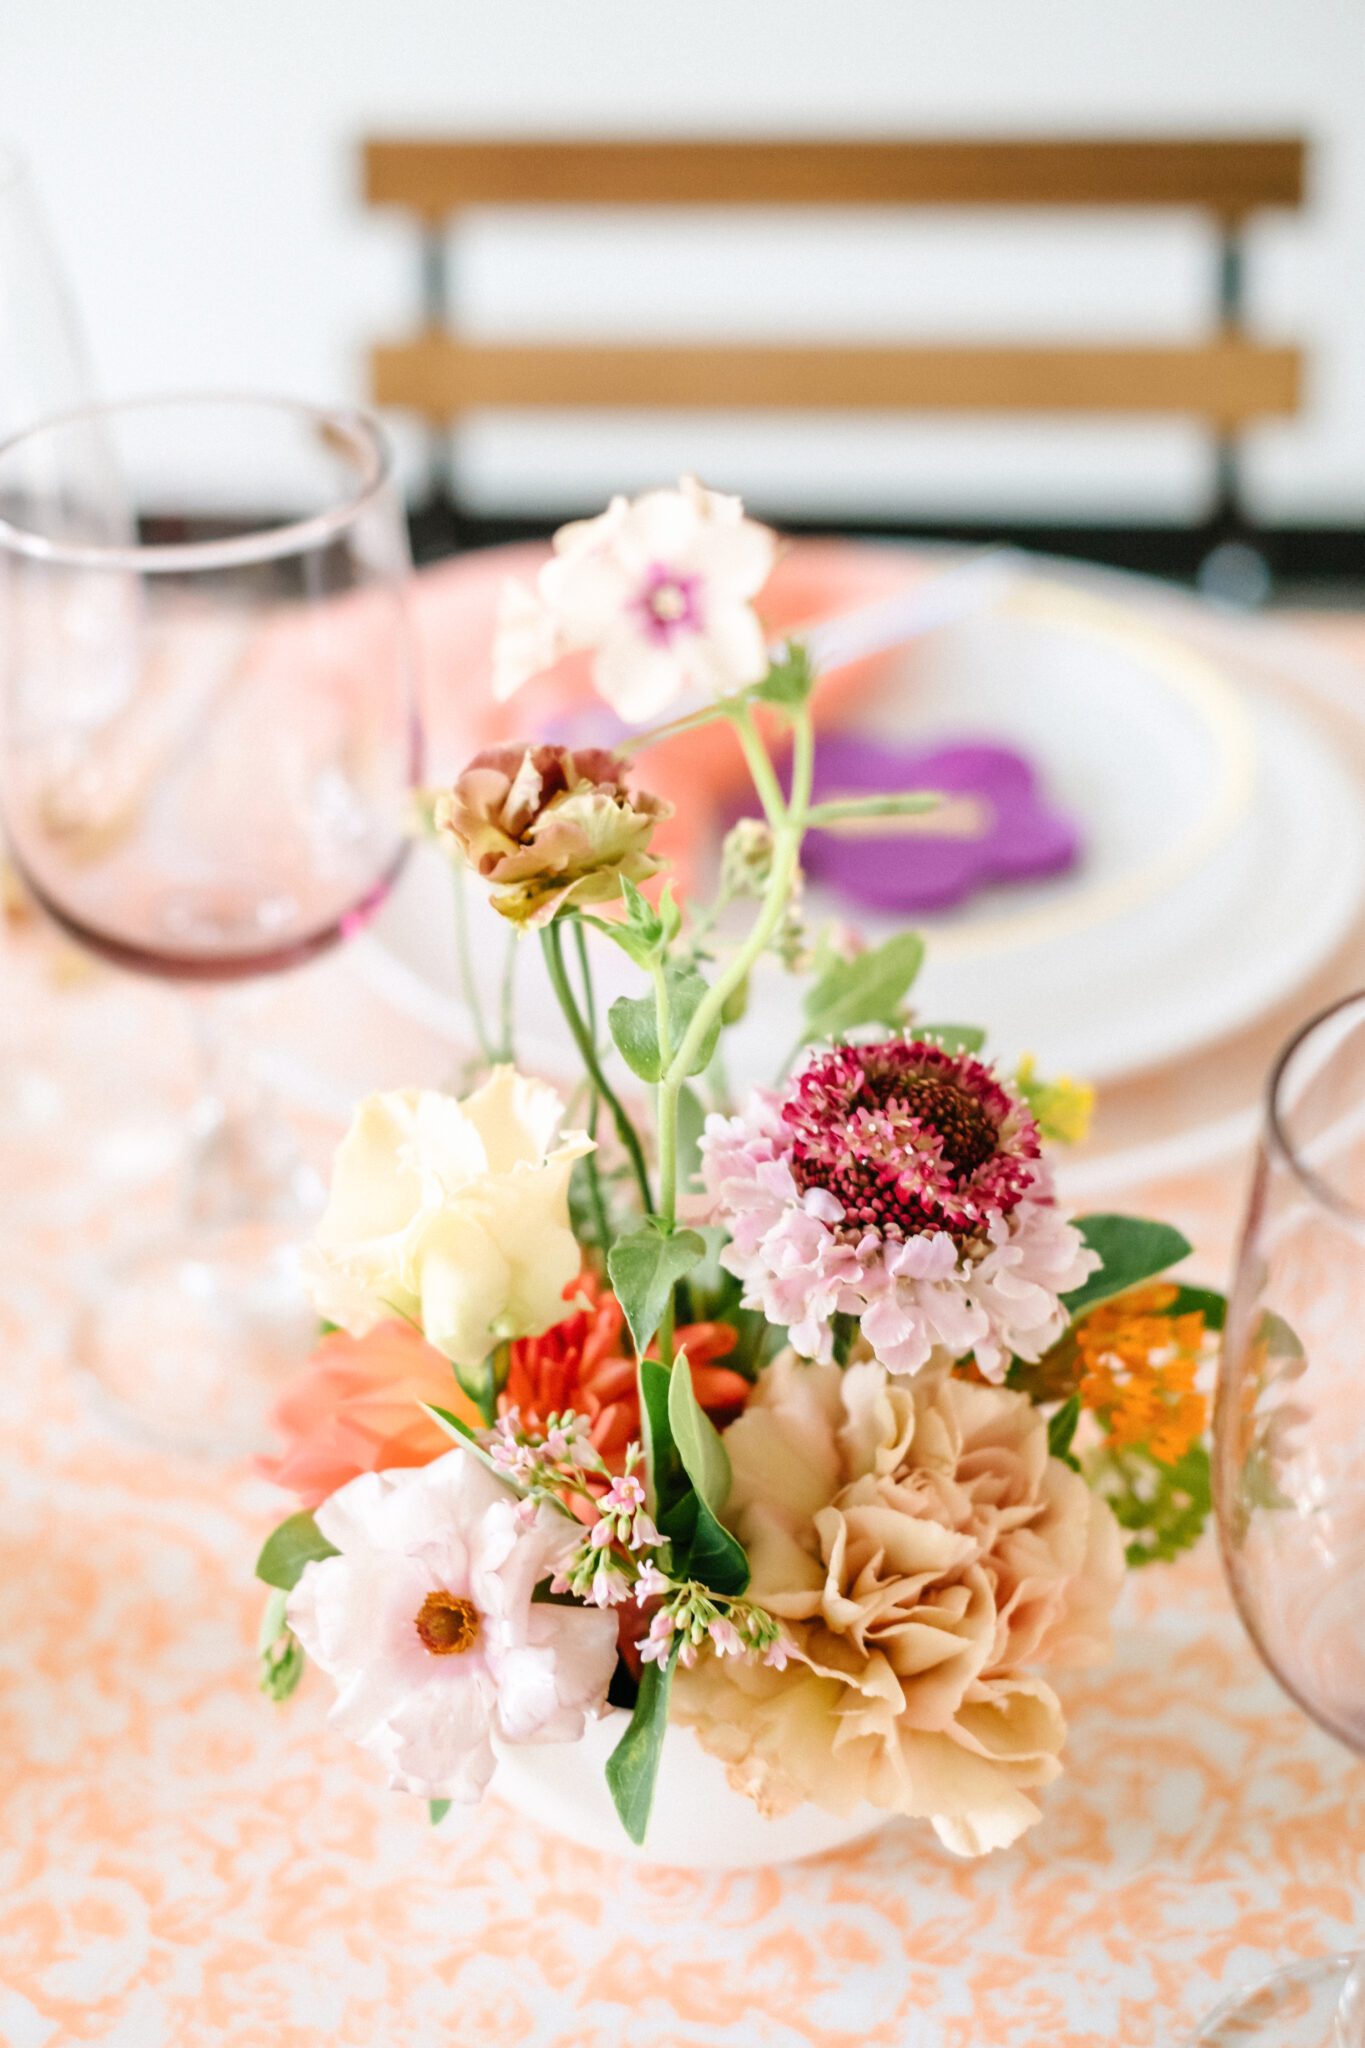 Bright & colourful floral reception table centerpiece by Meadow & Vine.